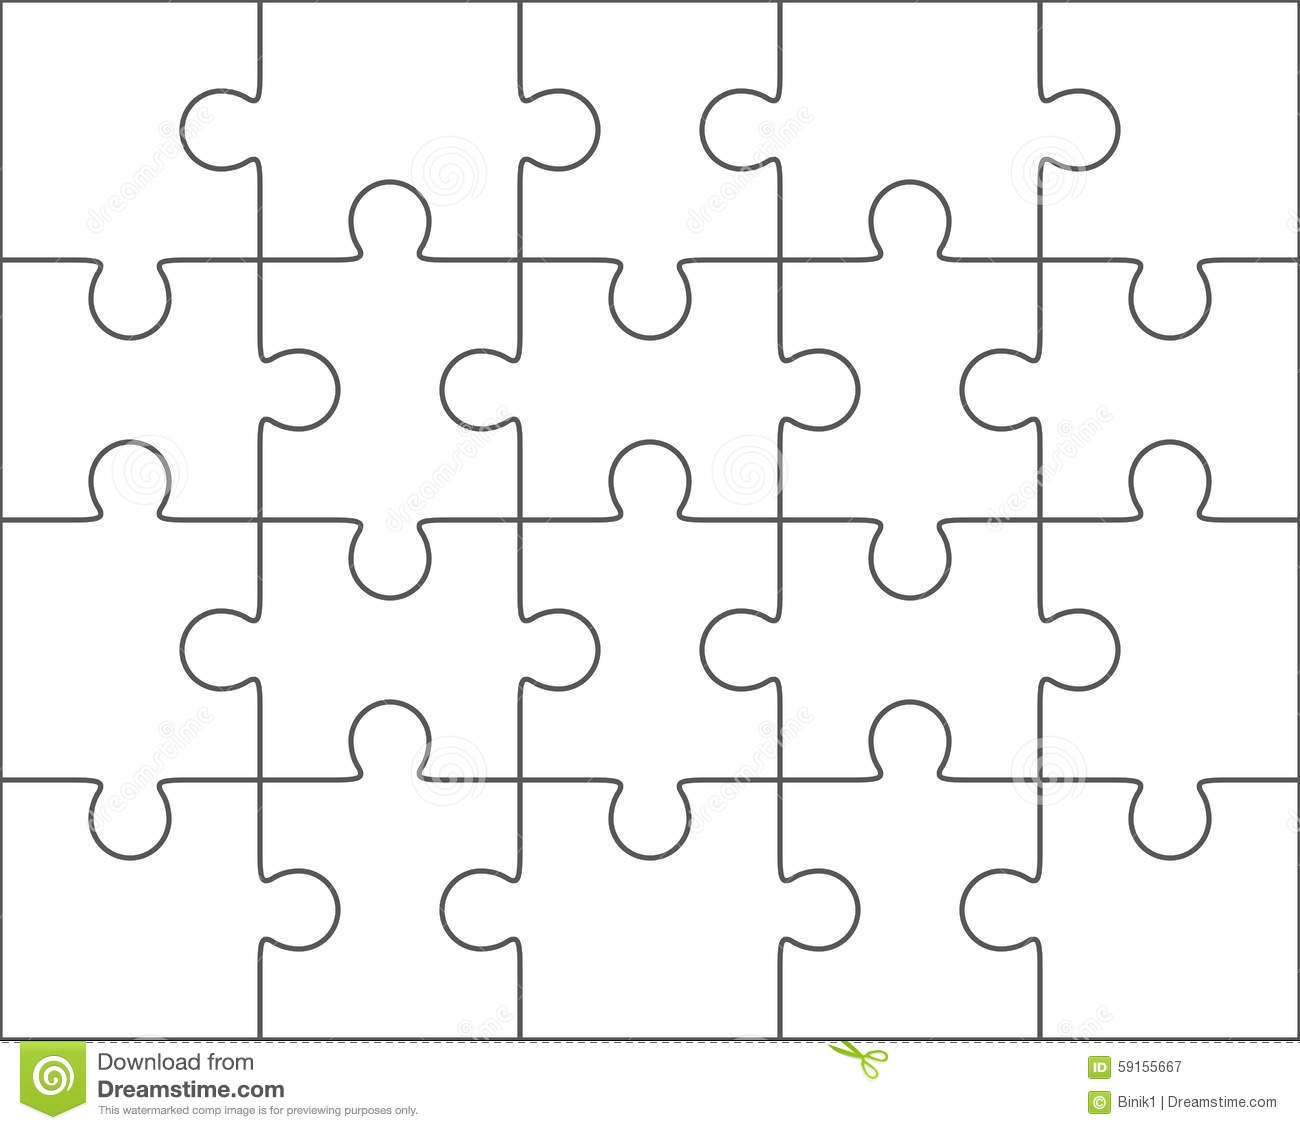 010 Jig Saw Puzzle Template Jigsaw Blank Twenty Pieces Simple Best - Printable Jigsaw Puzzle Template Generator